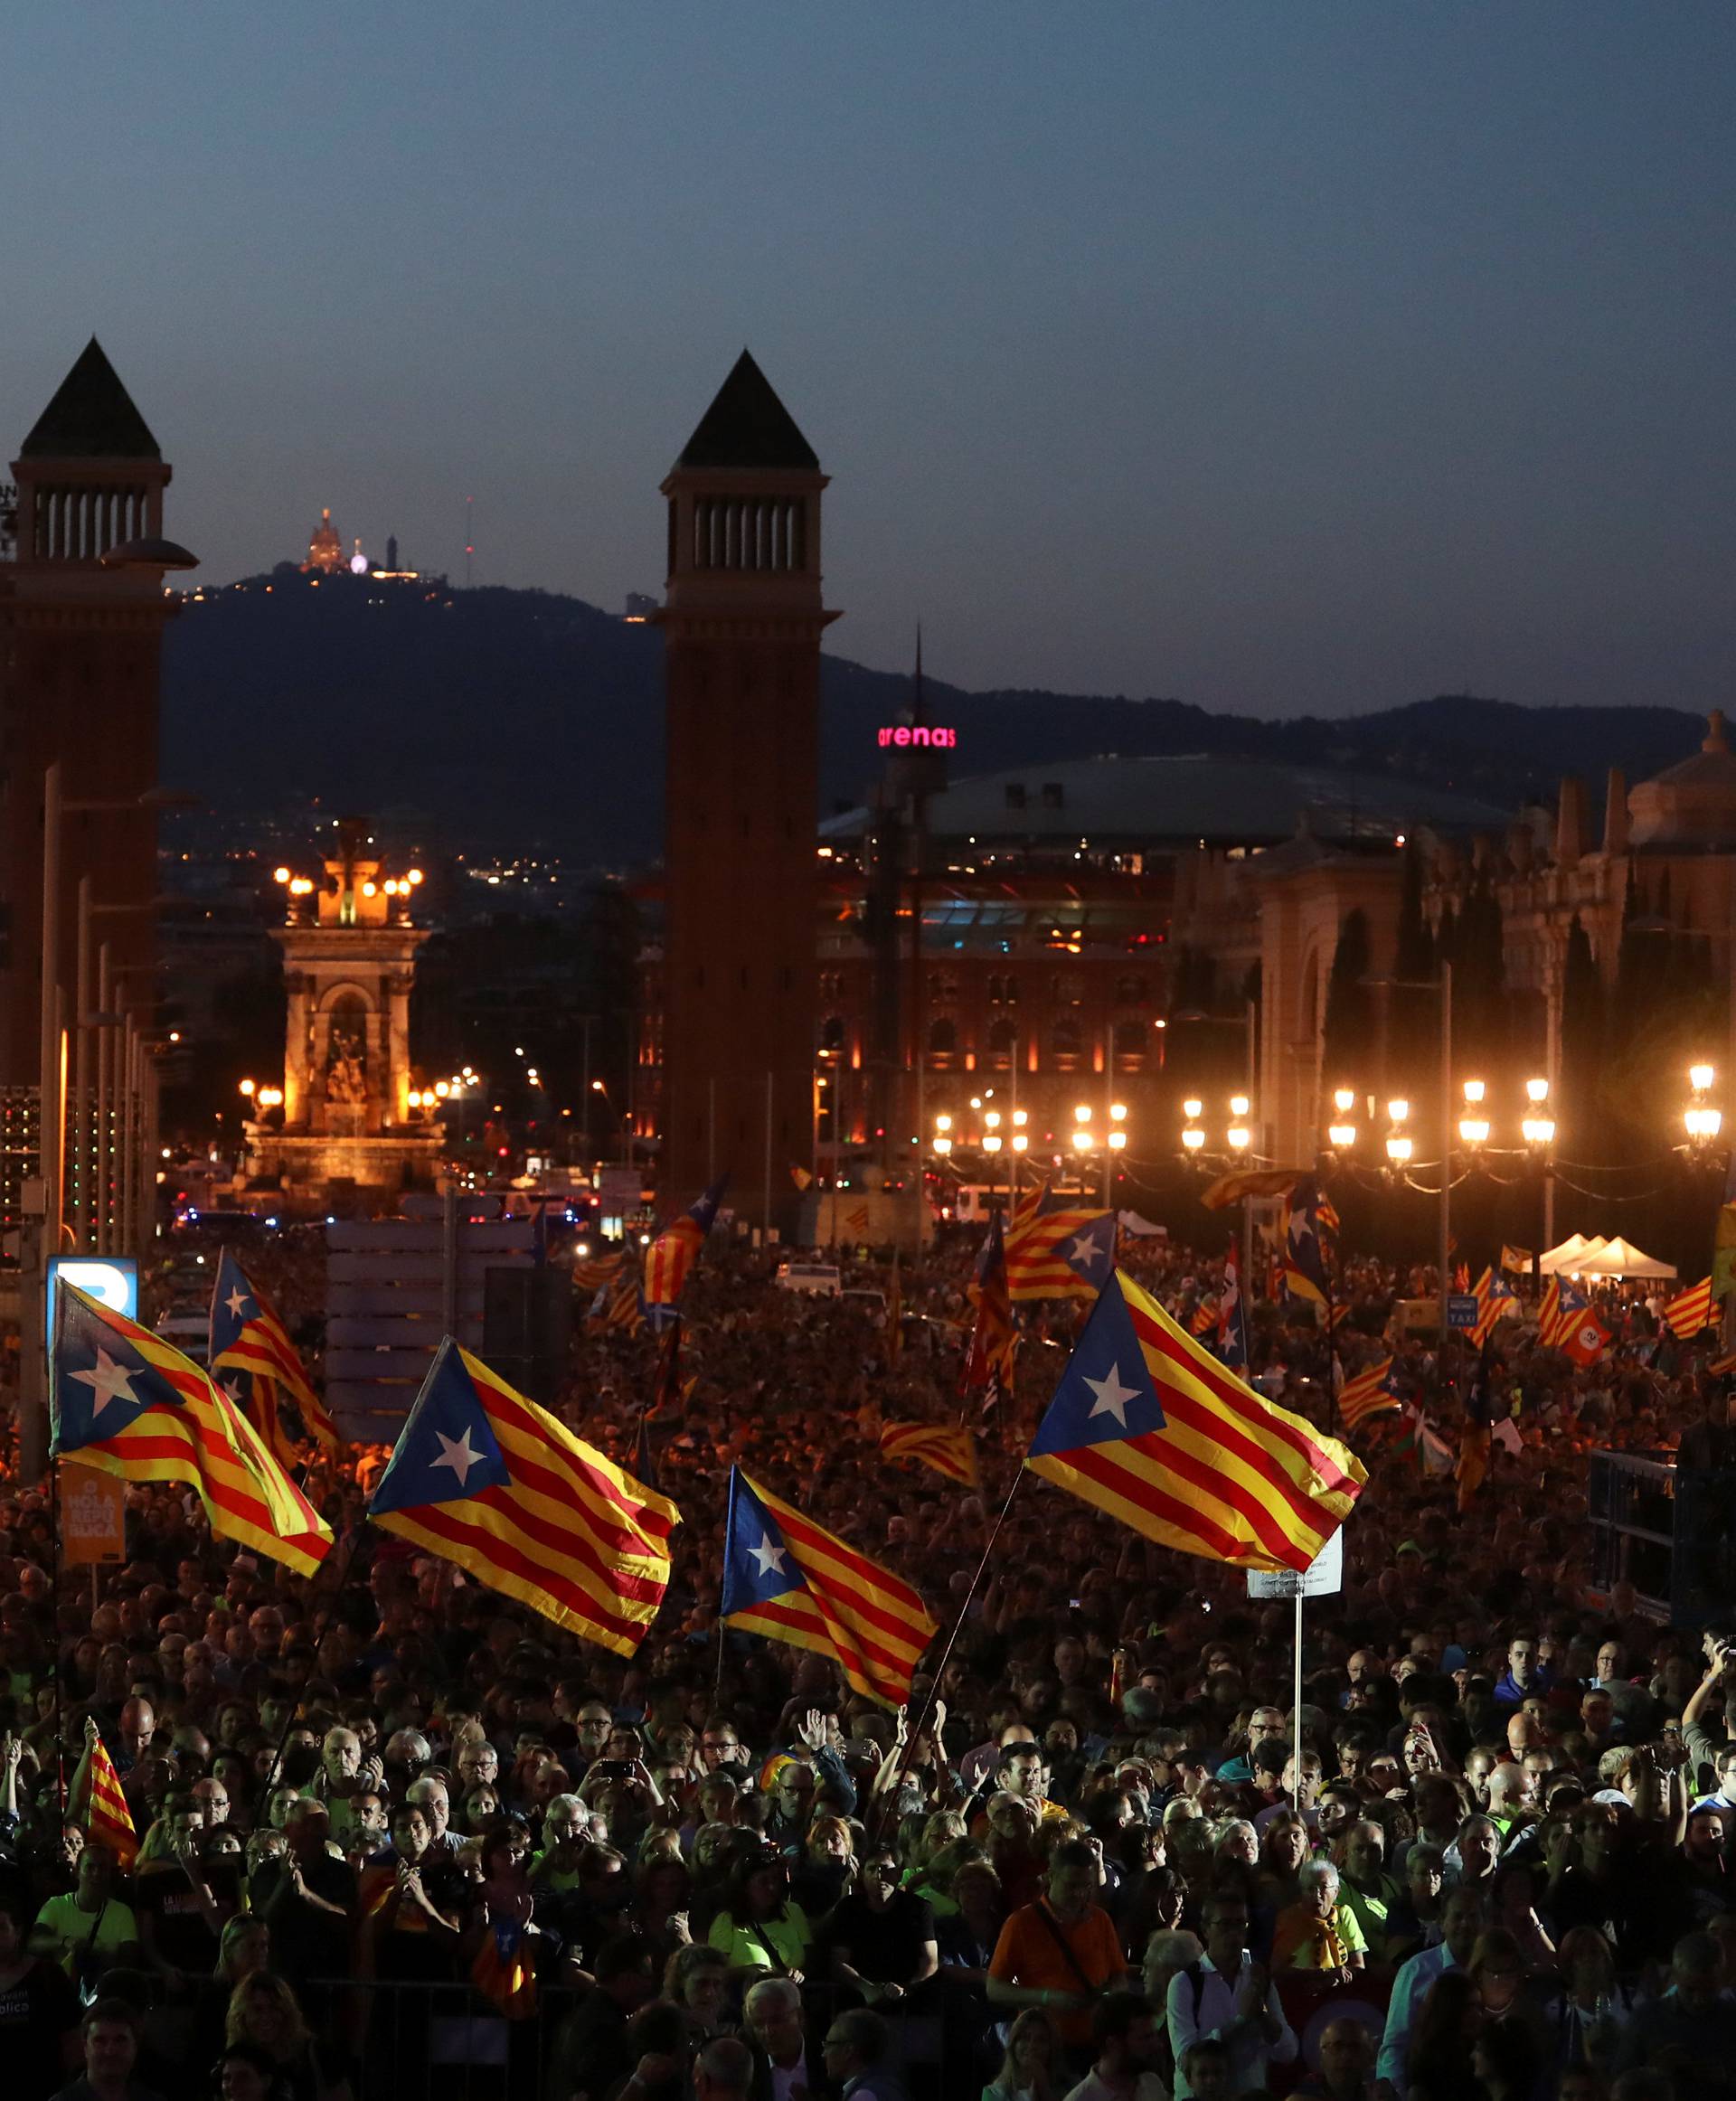 People wave Esteladas (Catalan separatist flags) as they attend a closing rally in favour of the banned October 1 independence referendum in Barcelona